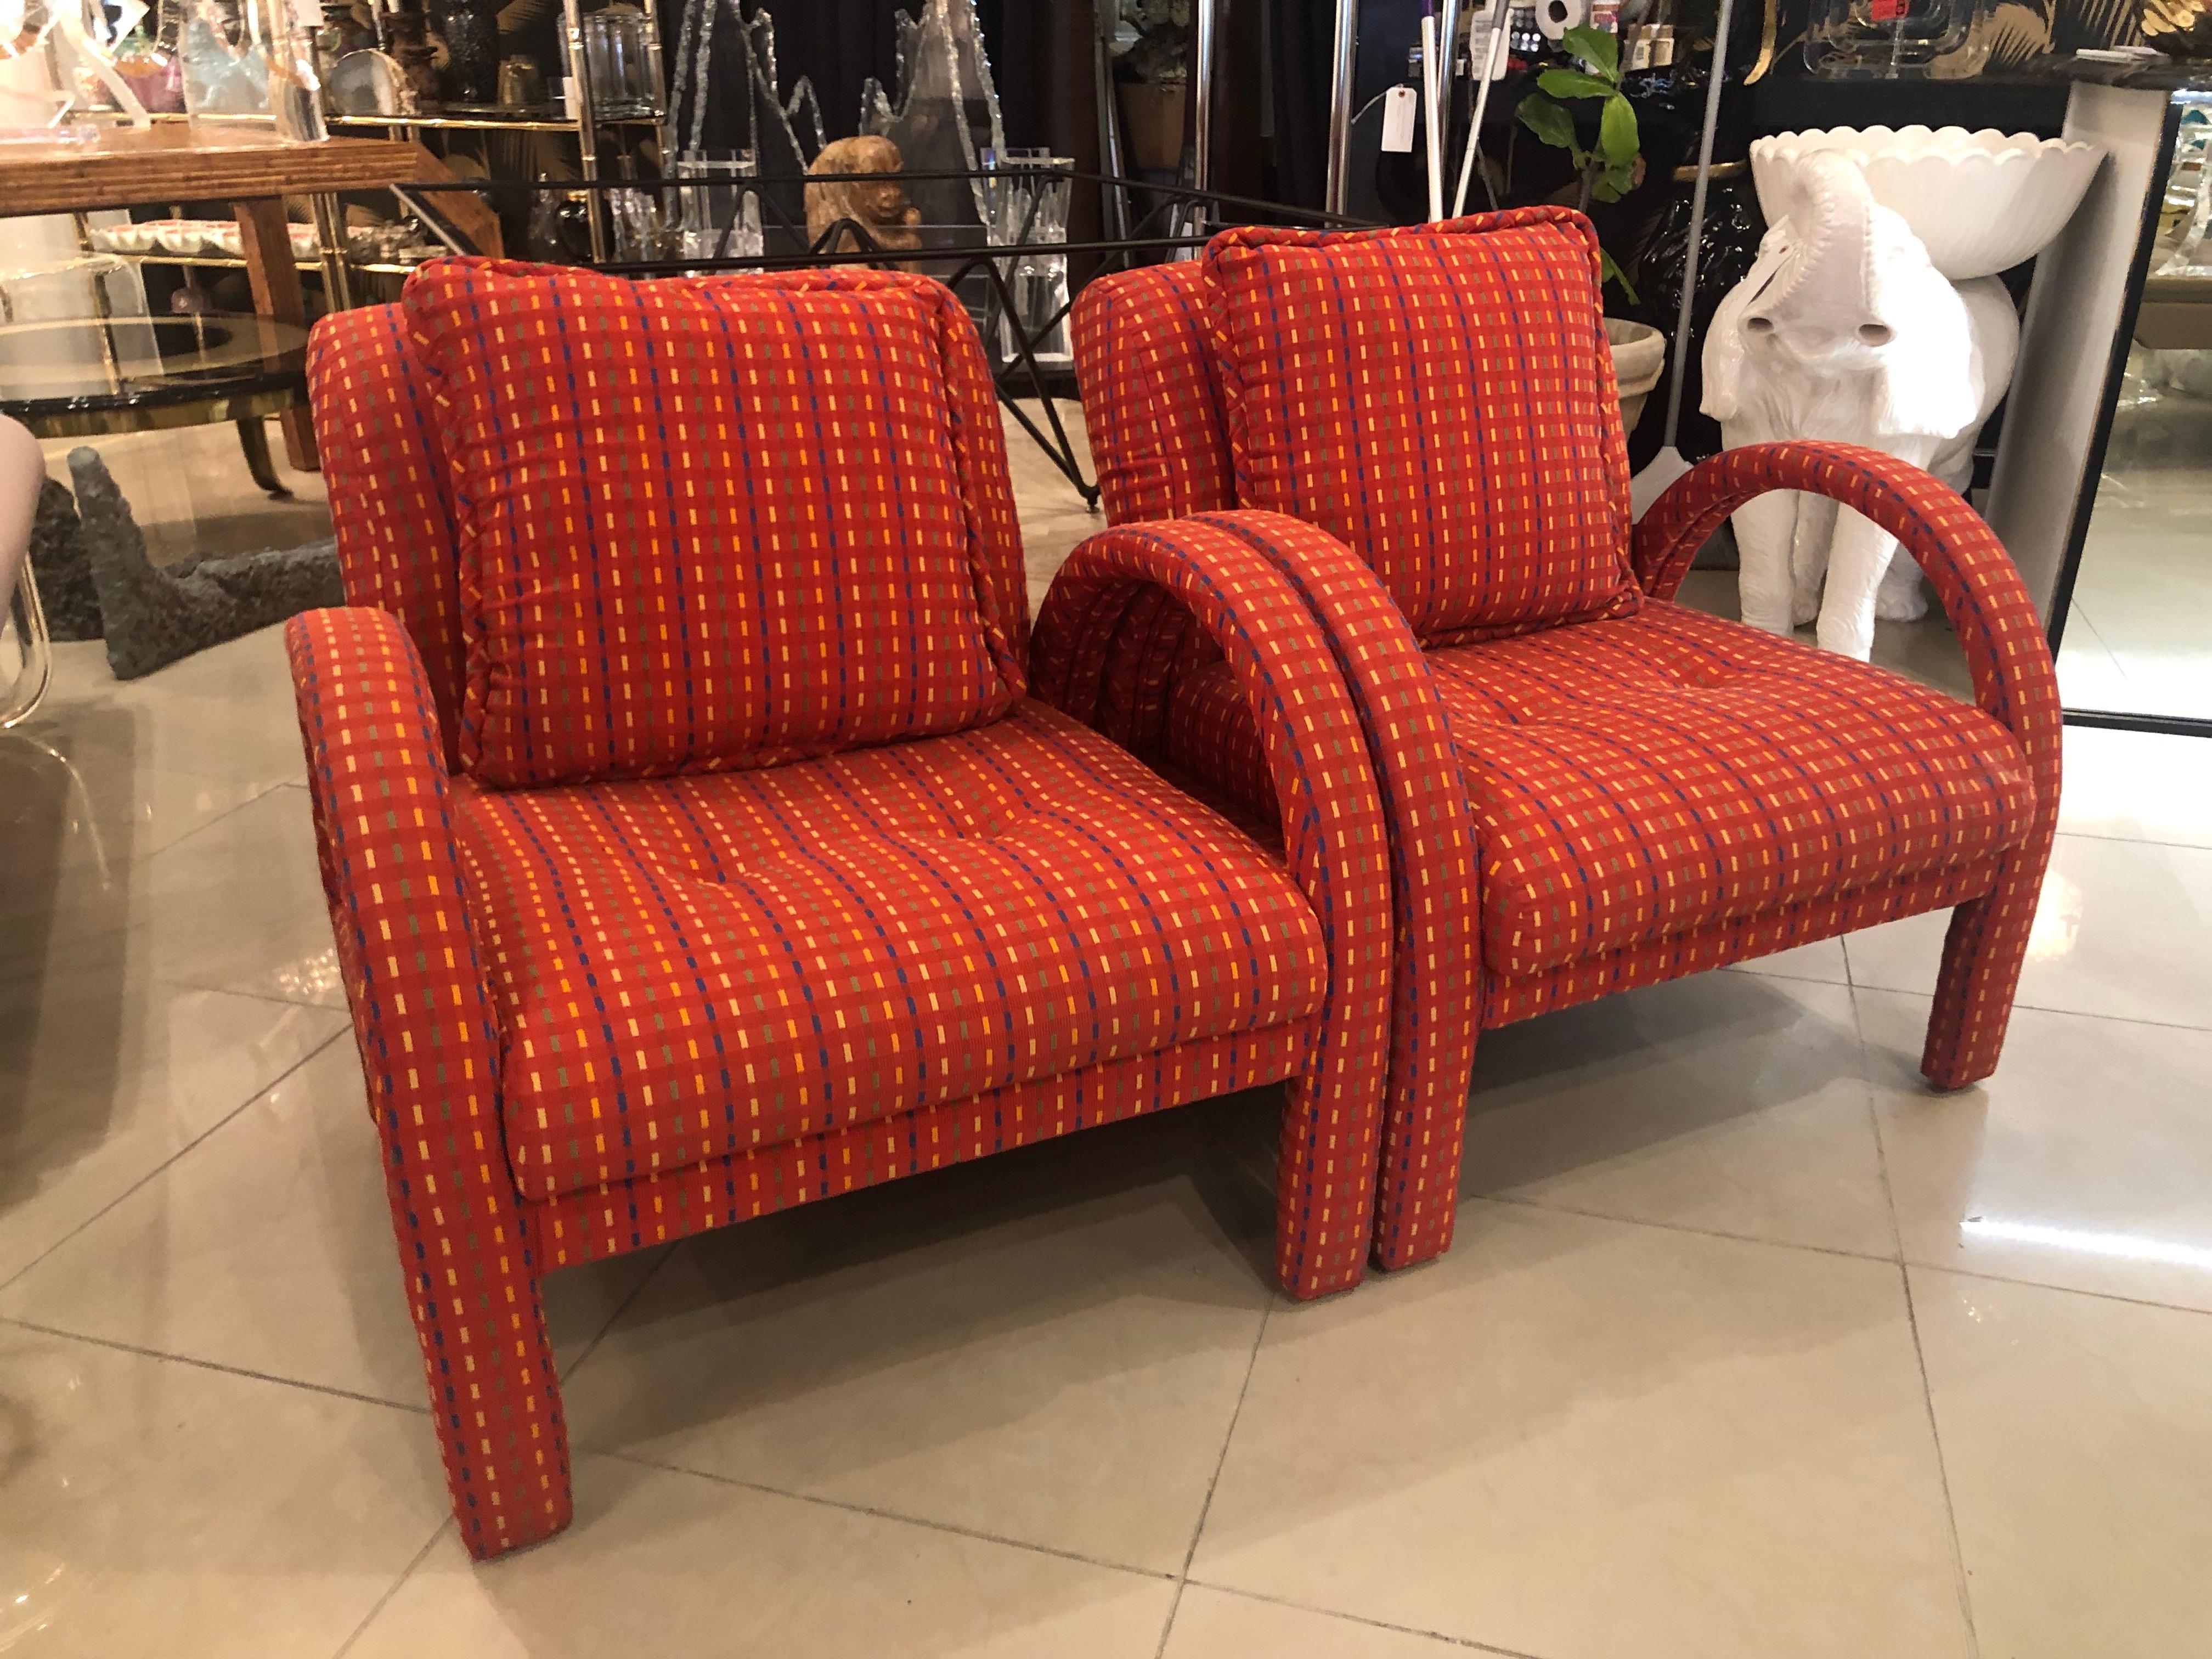 Vintage pair of arched armchairs club chairs in a new upholstered fabric. These have also been professionally steam cleaned. Includes matching pair of small pillows (pictured).
Measures: Cushion depth 21.5
Overall depth is listed below.